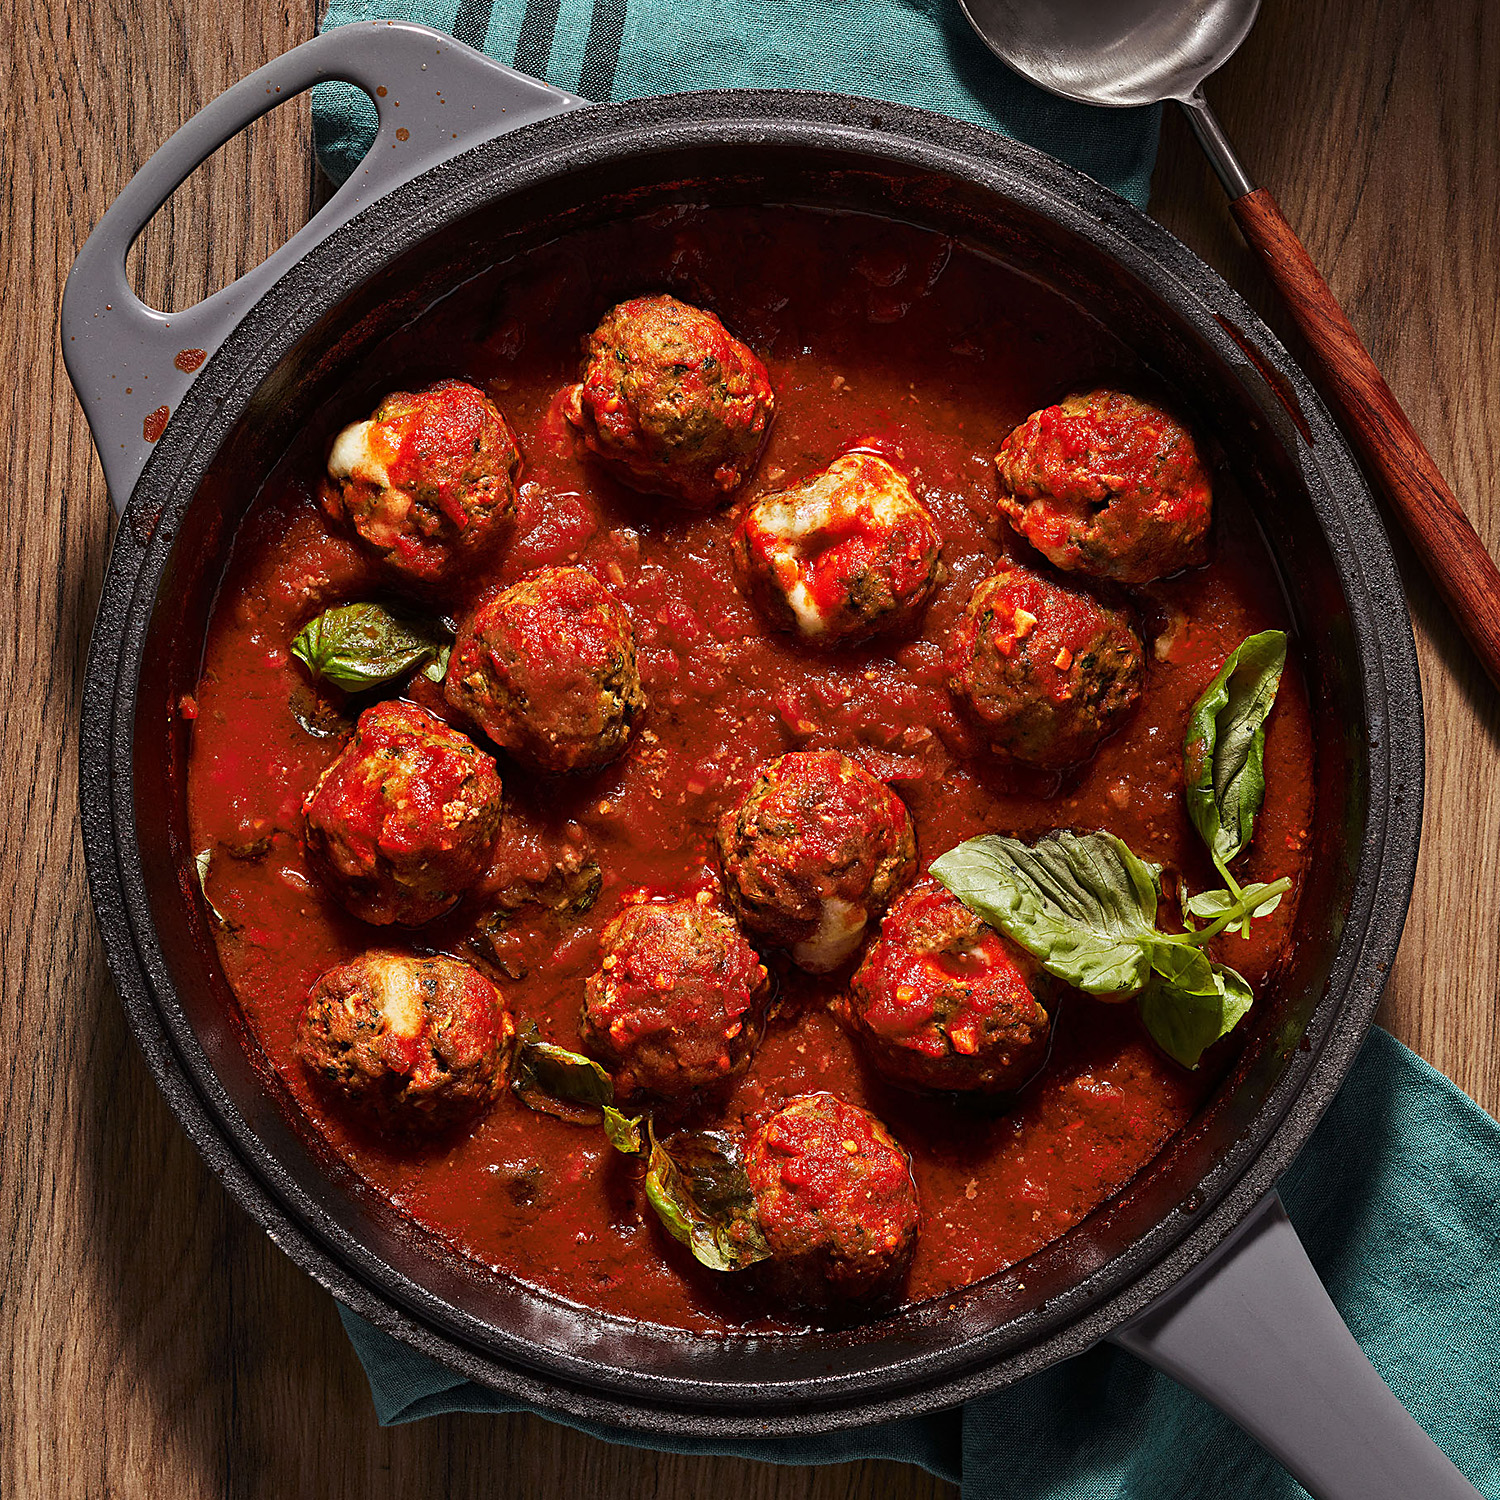 Provolone-Stuffed Meatballs with Kale